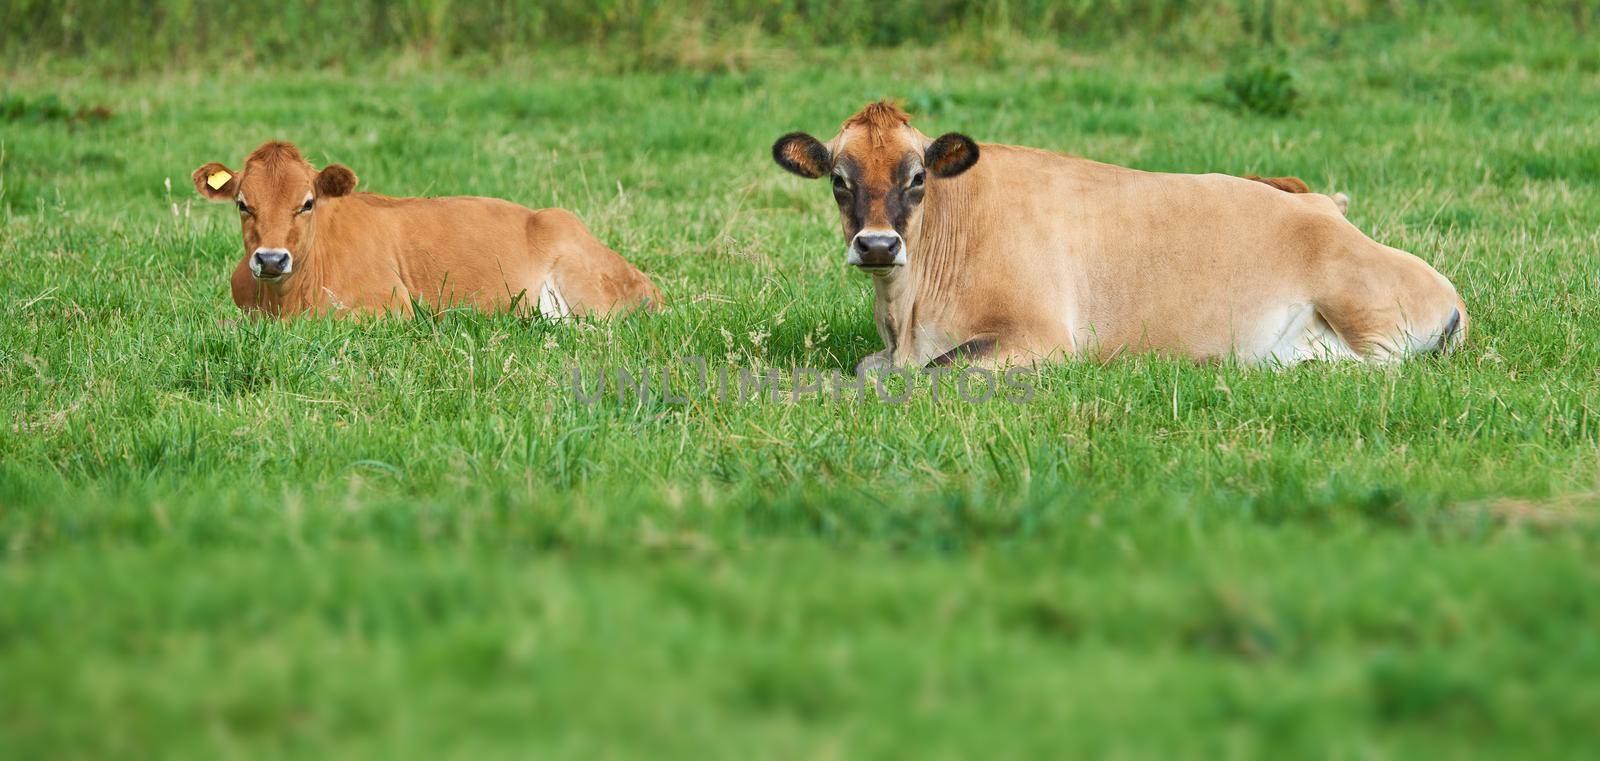 Two brown cow lying down on an organic green dairy farm in the countryside. Cattle or livestock in an open, empty and secluded grassy field or meadow. Animals in their natural environment in nature by YuriArcurs